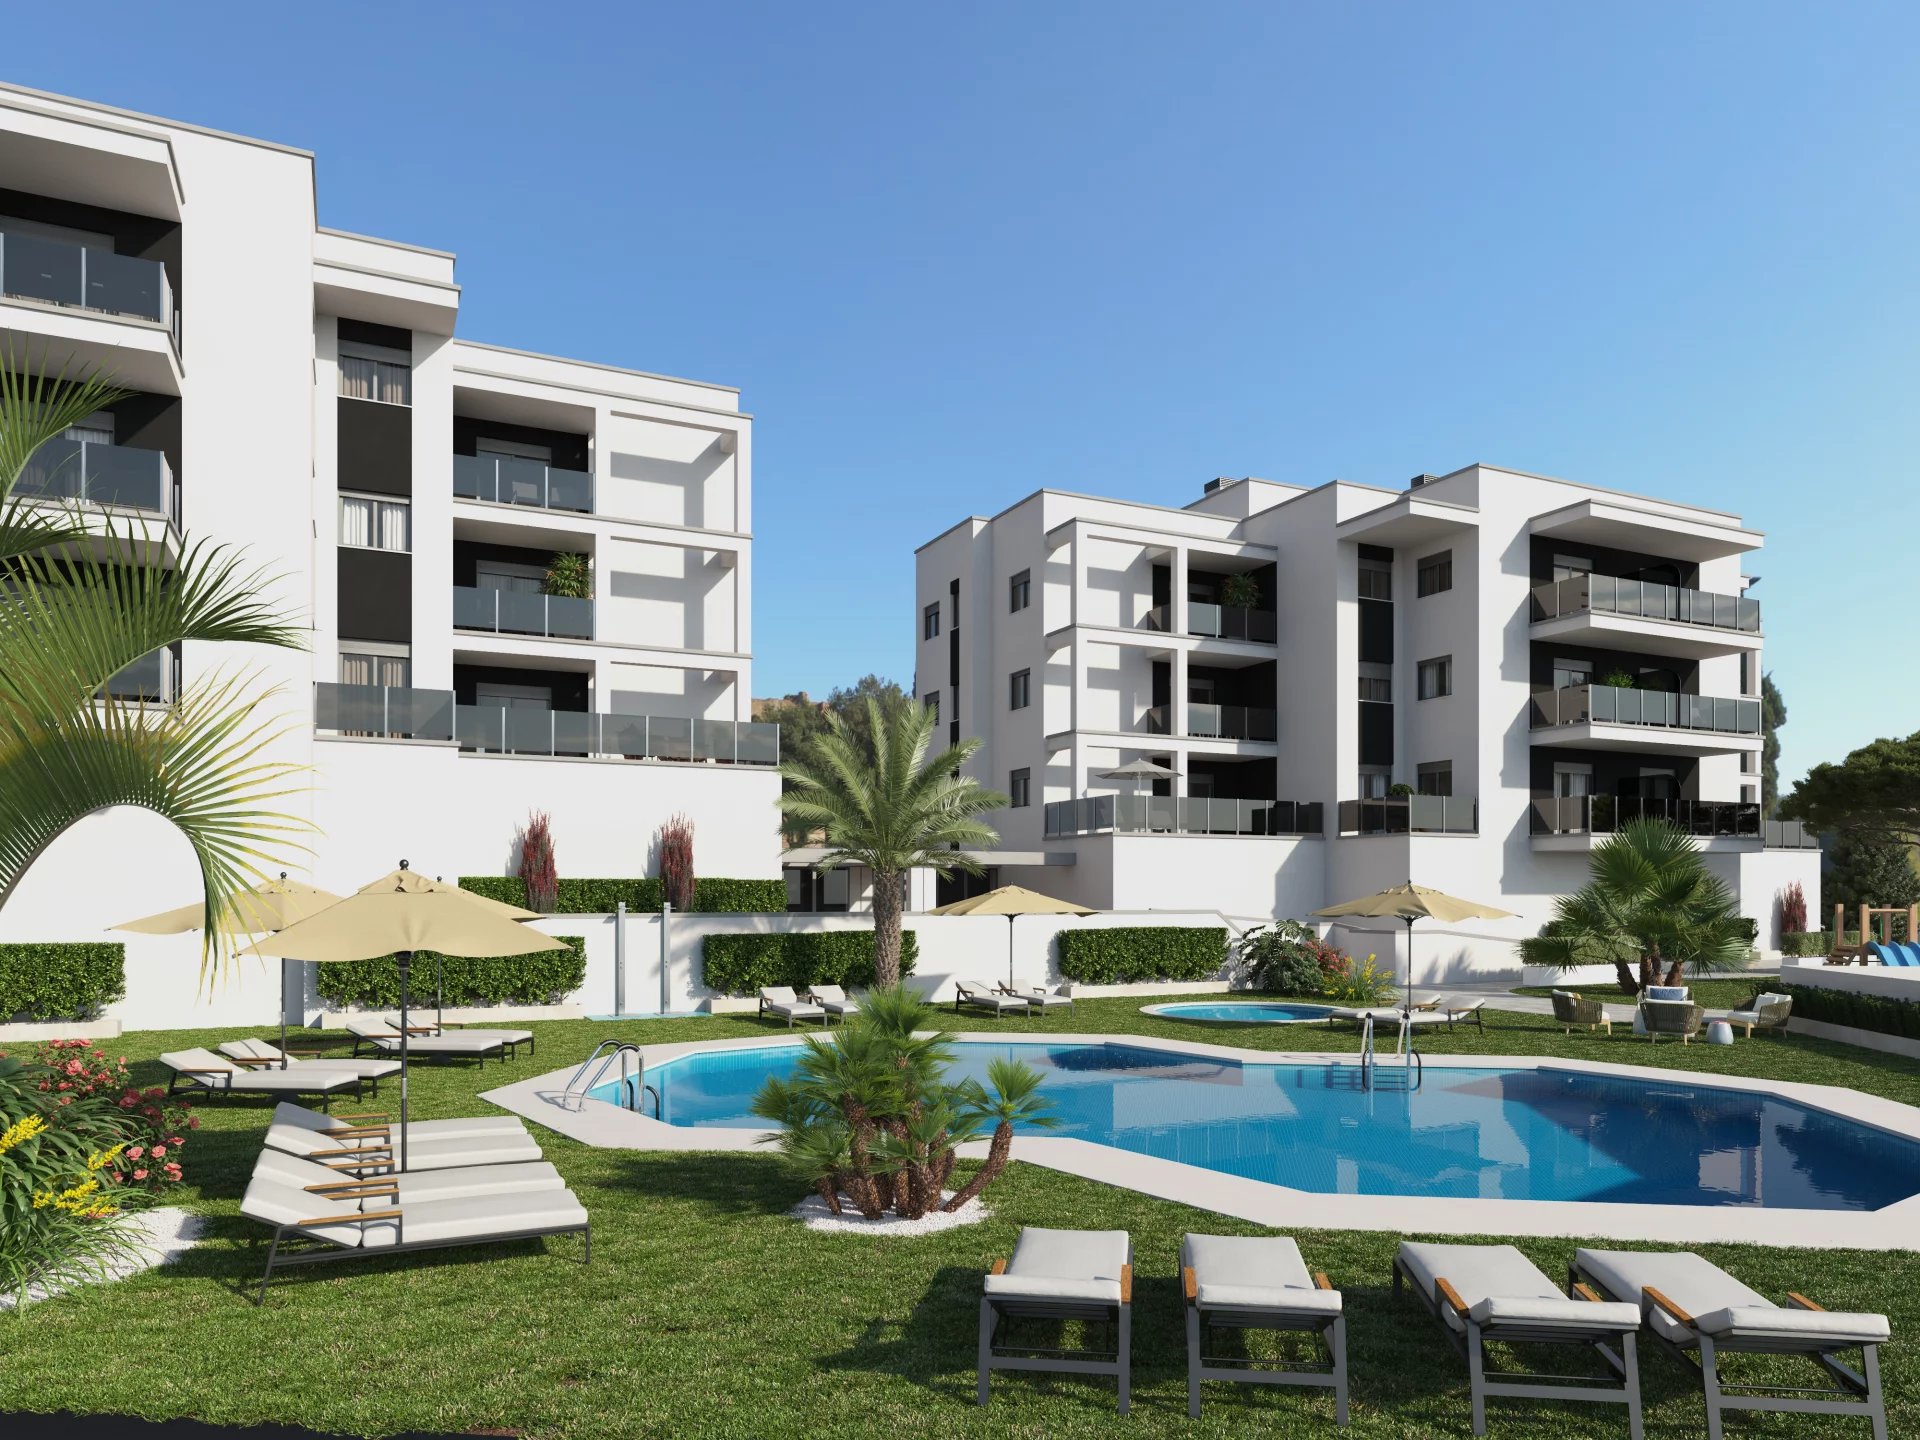 New construction project with 47 apartments in Villajoyosa